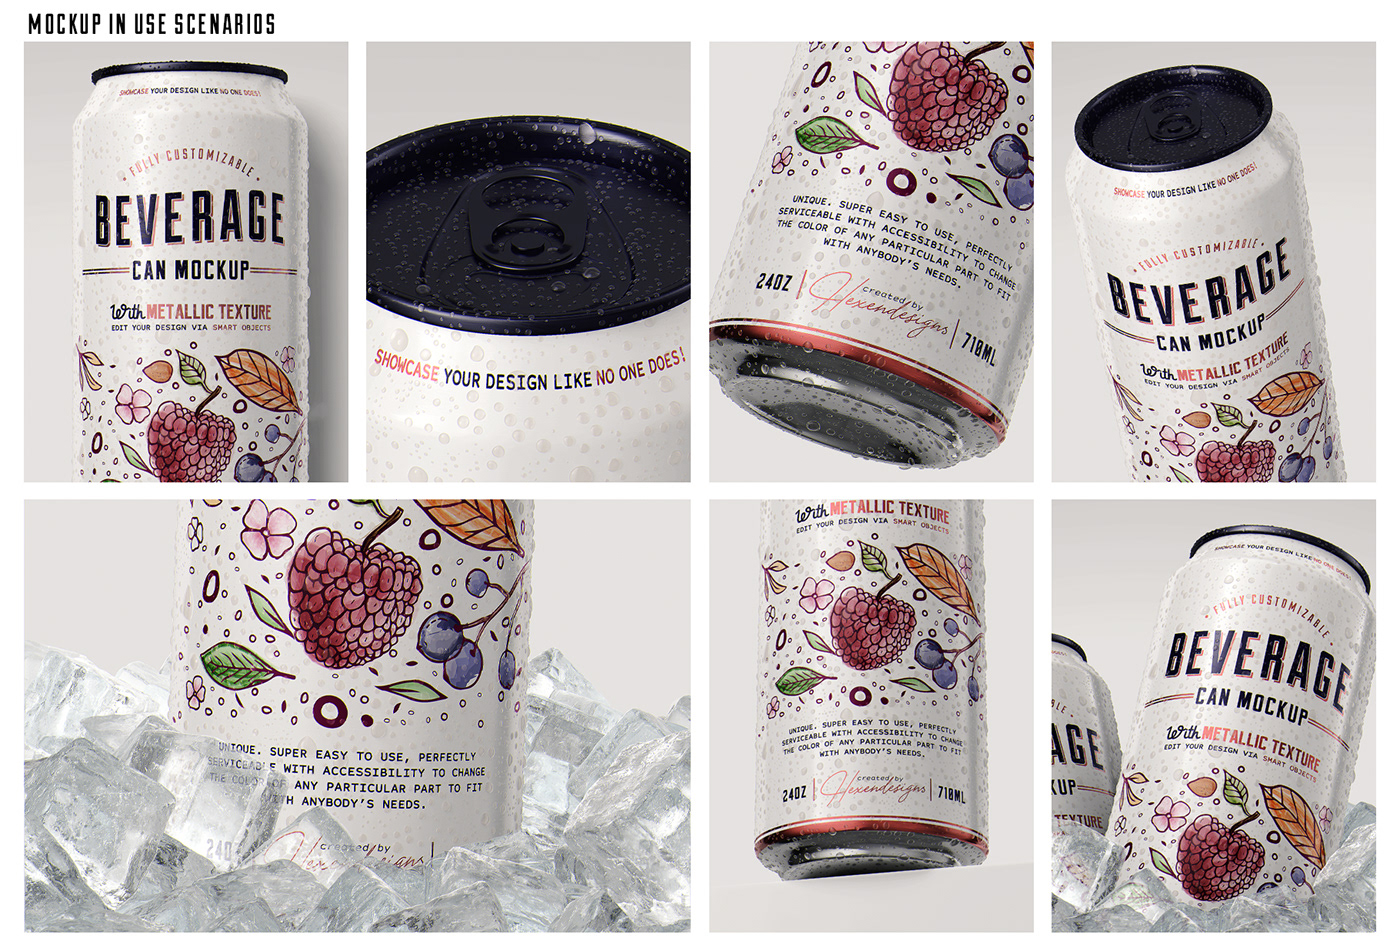 Mockup psd template can mockup soda can drink beer 710ml can mockup beer can mockup